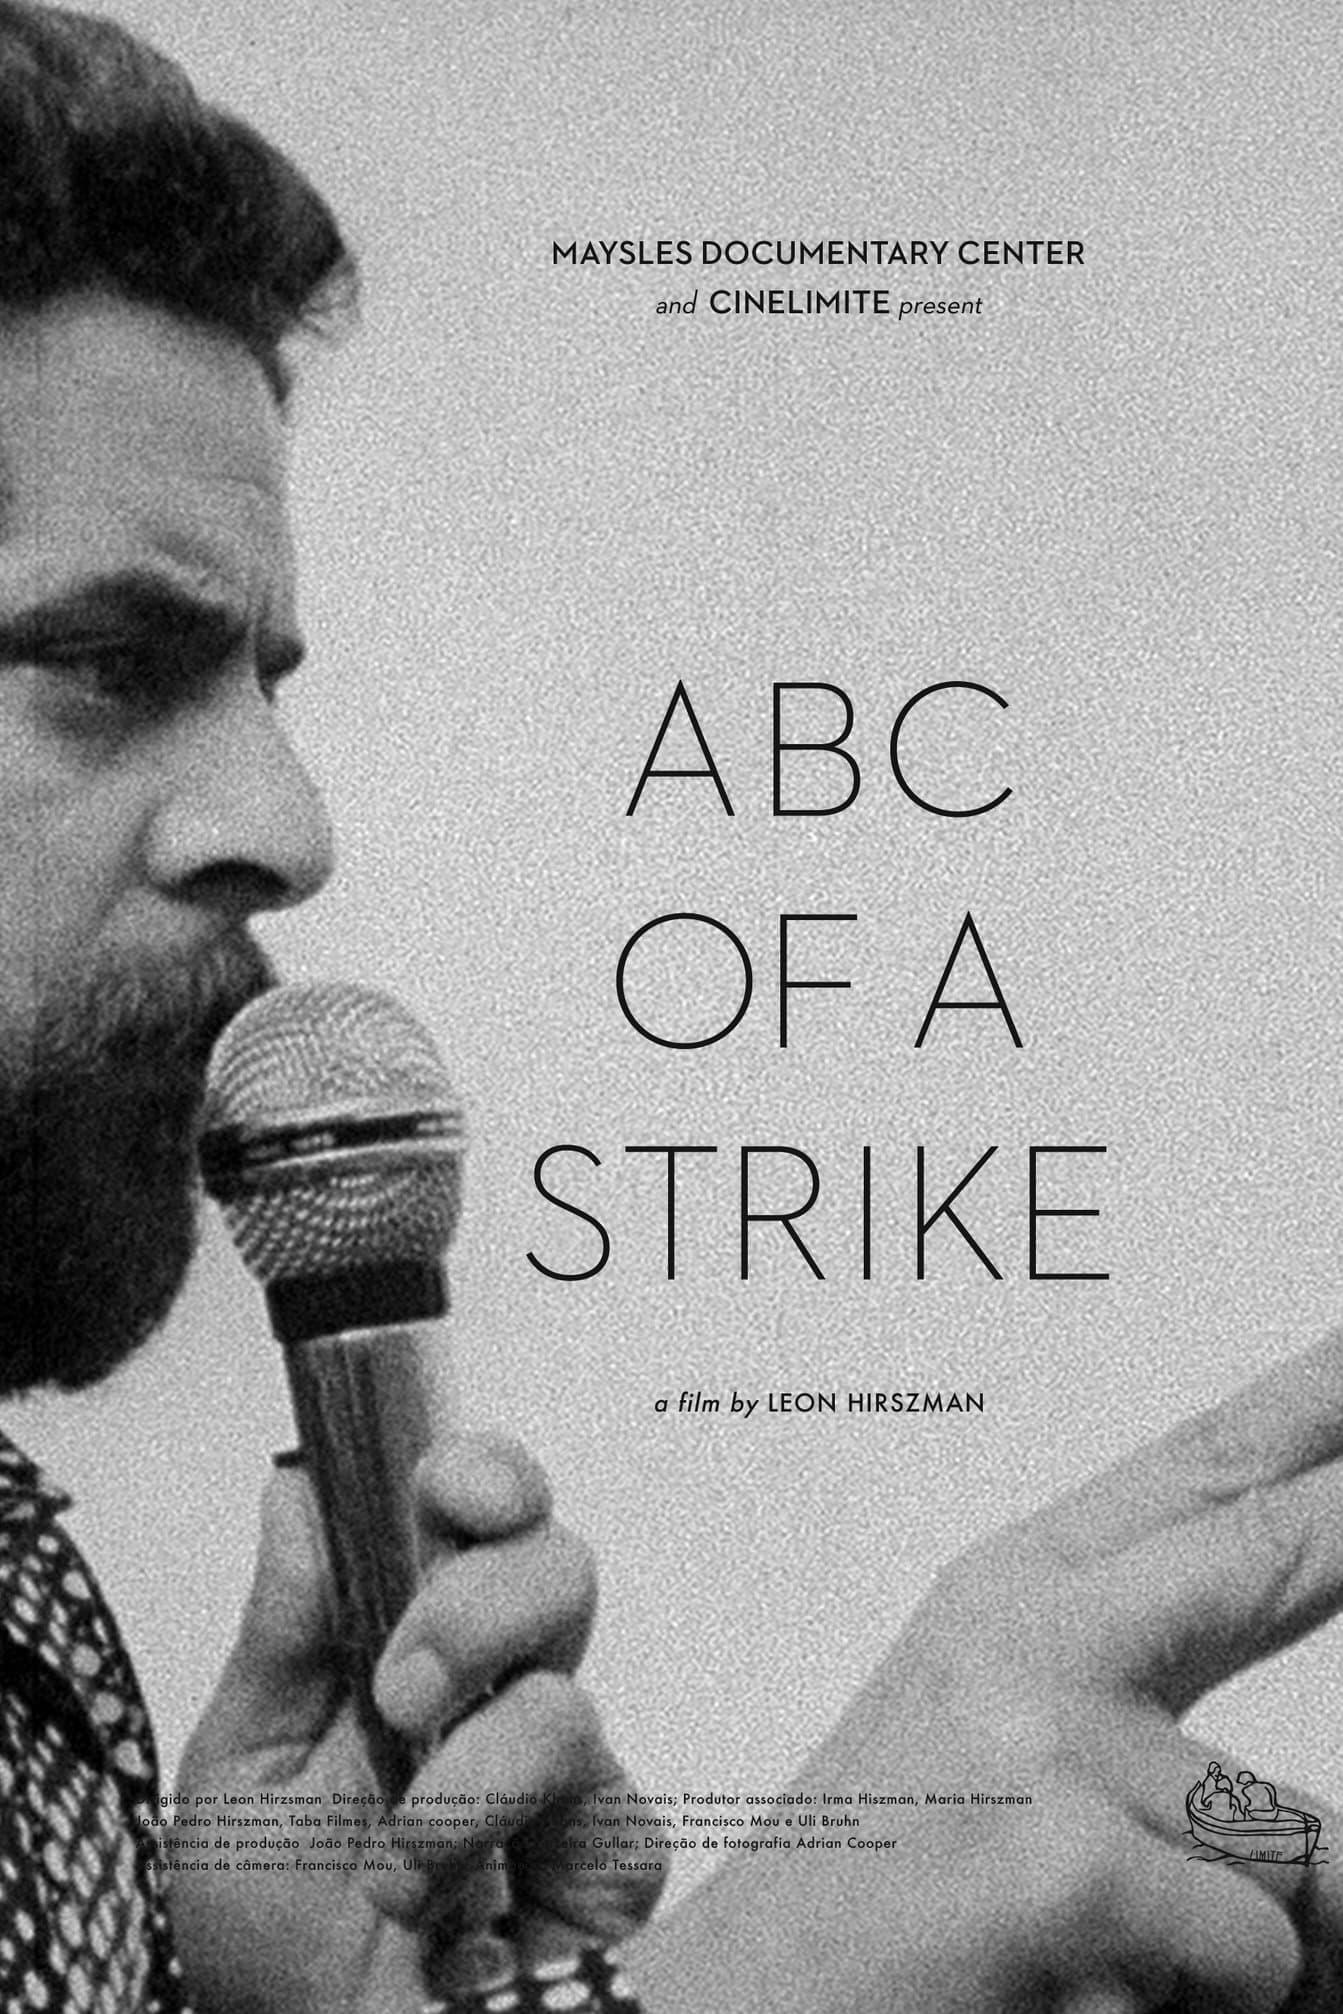 ABC of a Strike poster